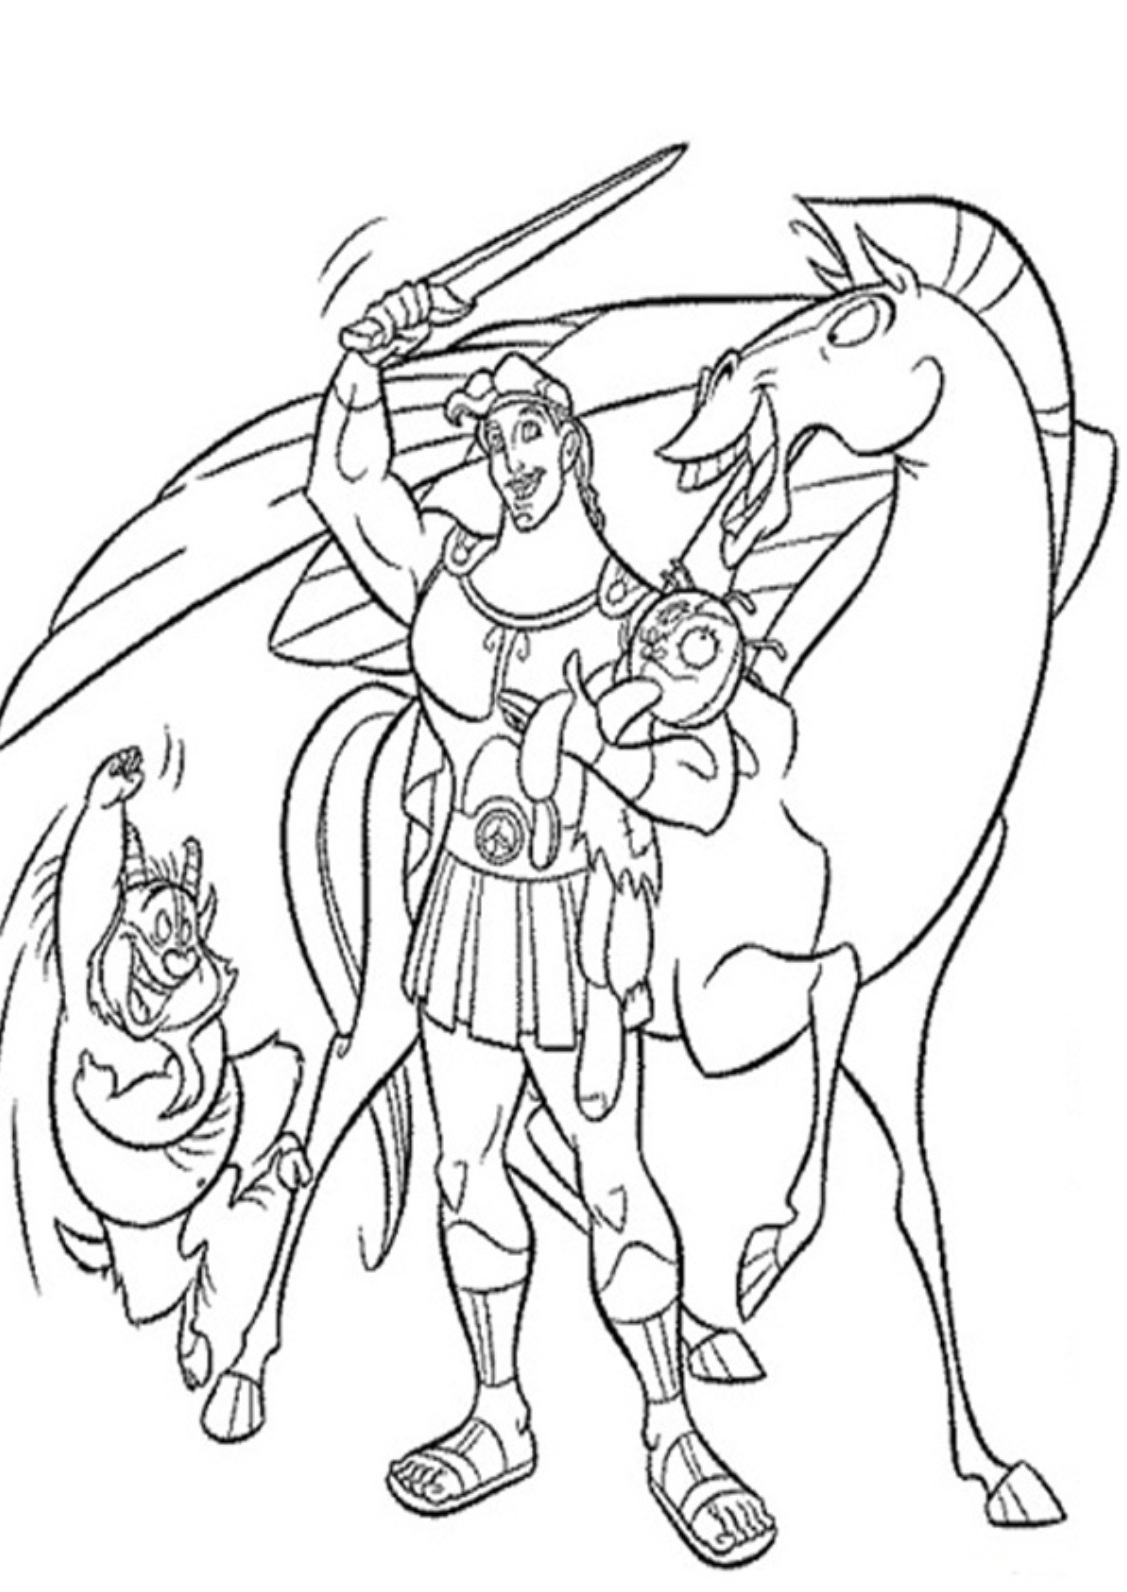 Hercules coloring pages to download and print for free